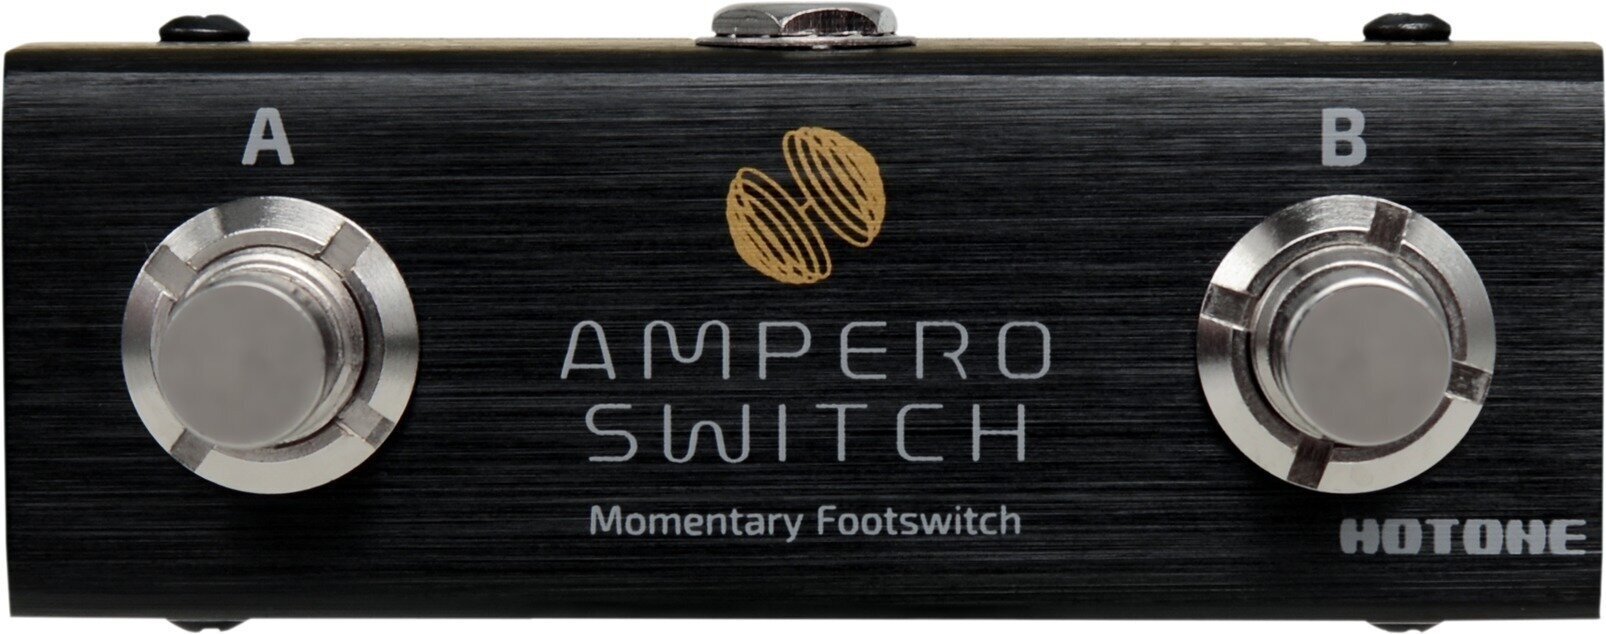 Footswitch Hotone Ampero Switch Footswitch